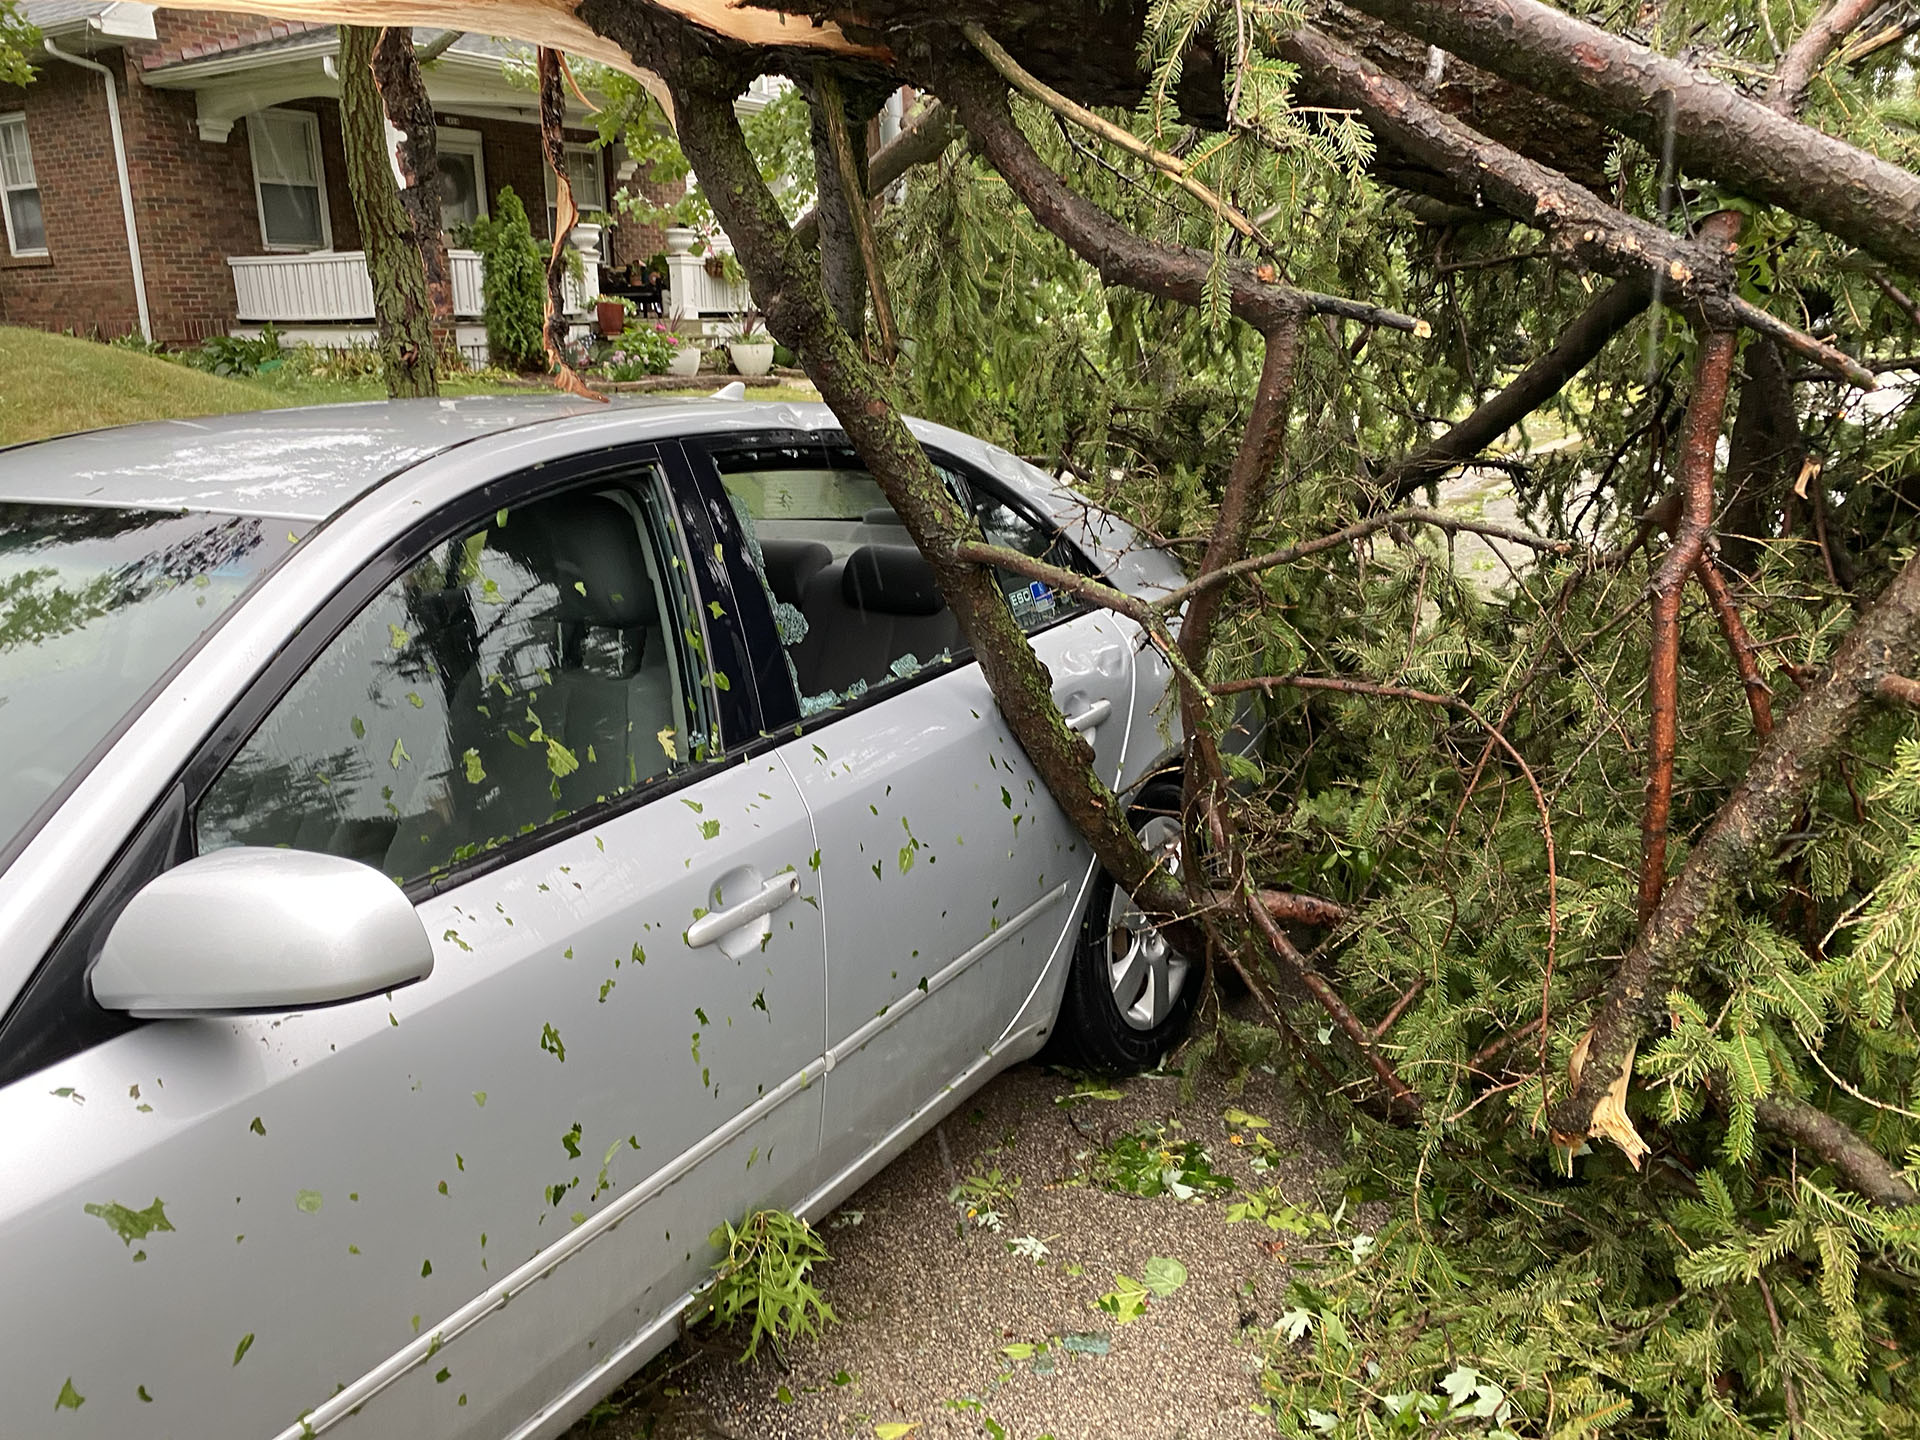 A gray car is spattered with leaf debris from high winds. On top of the car, an evergreen tree has collapsed, shattering the window.